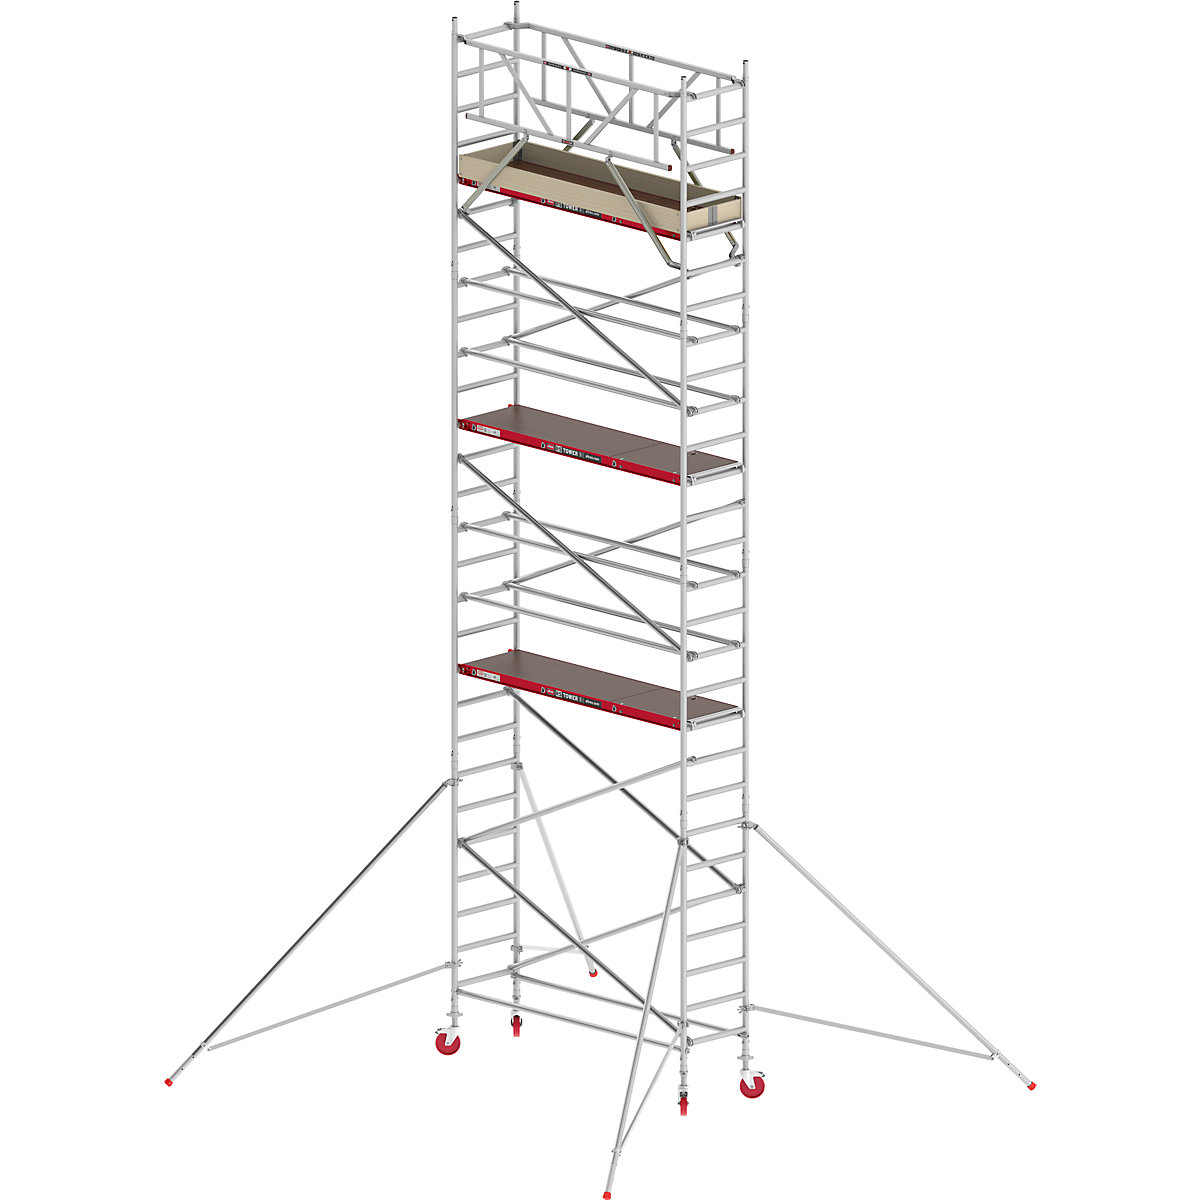 RS TOWER 41 slim mobile access tower – Altrex, wooden platform, length 2.45 m, working height 9.20 m-1